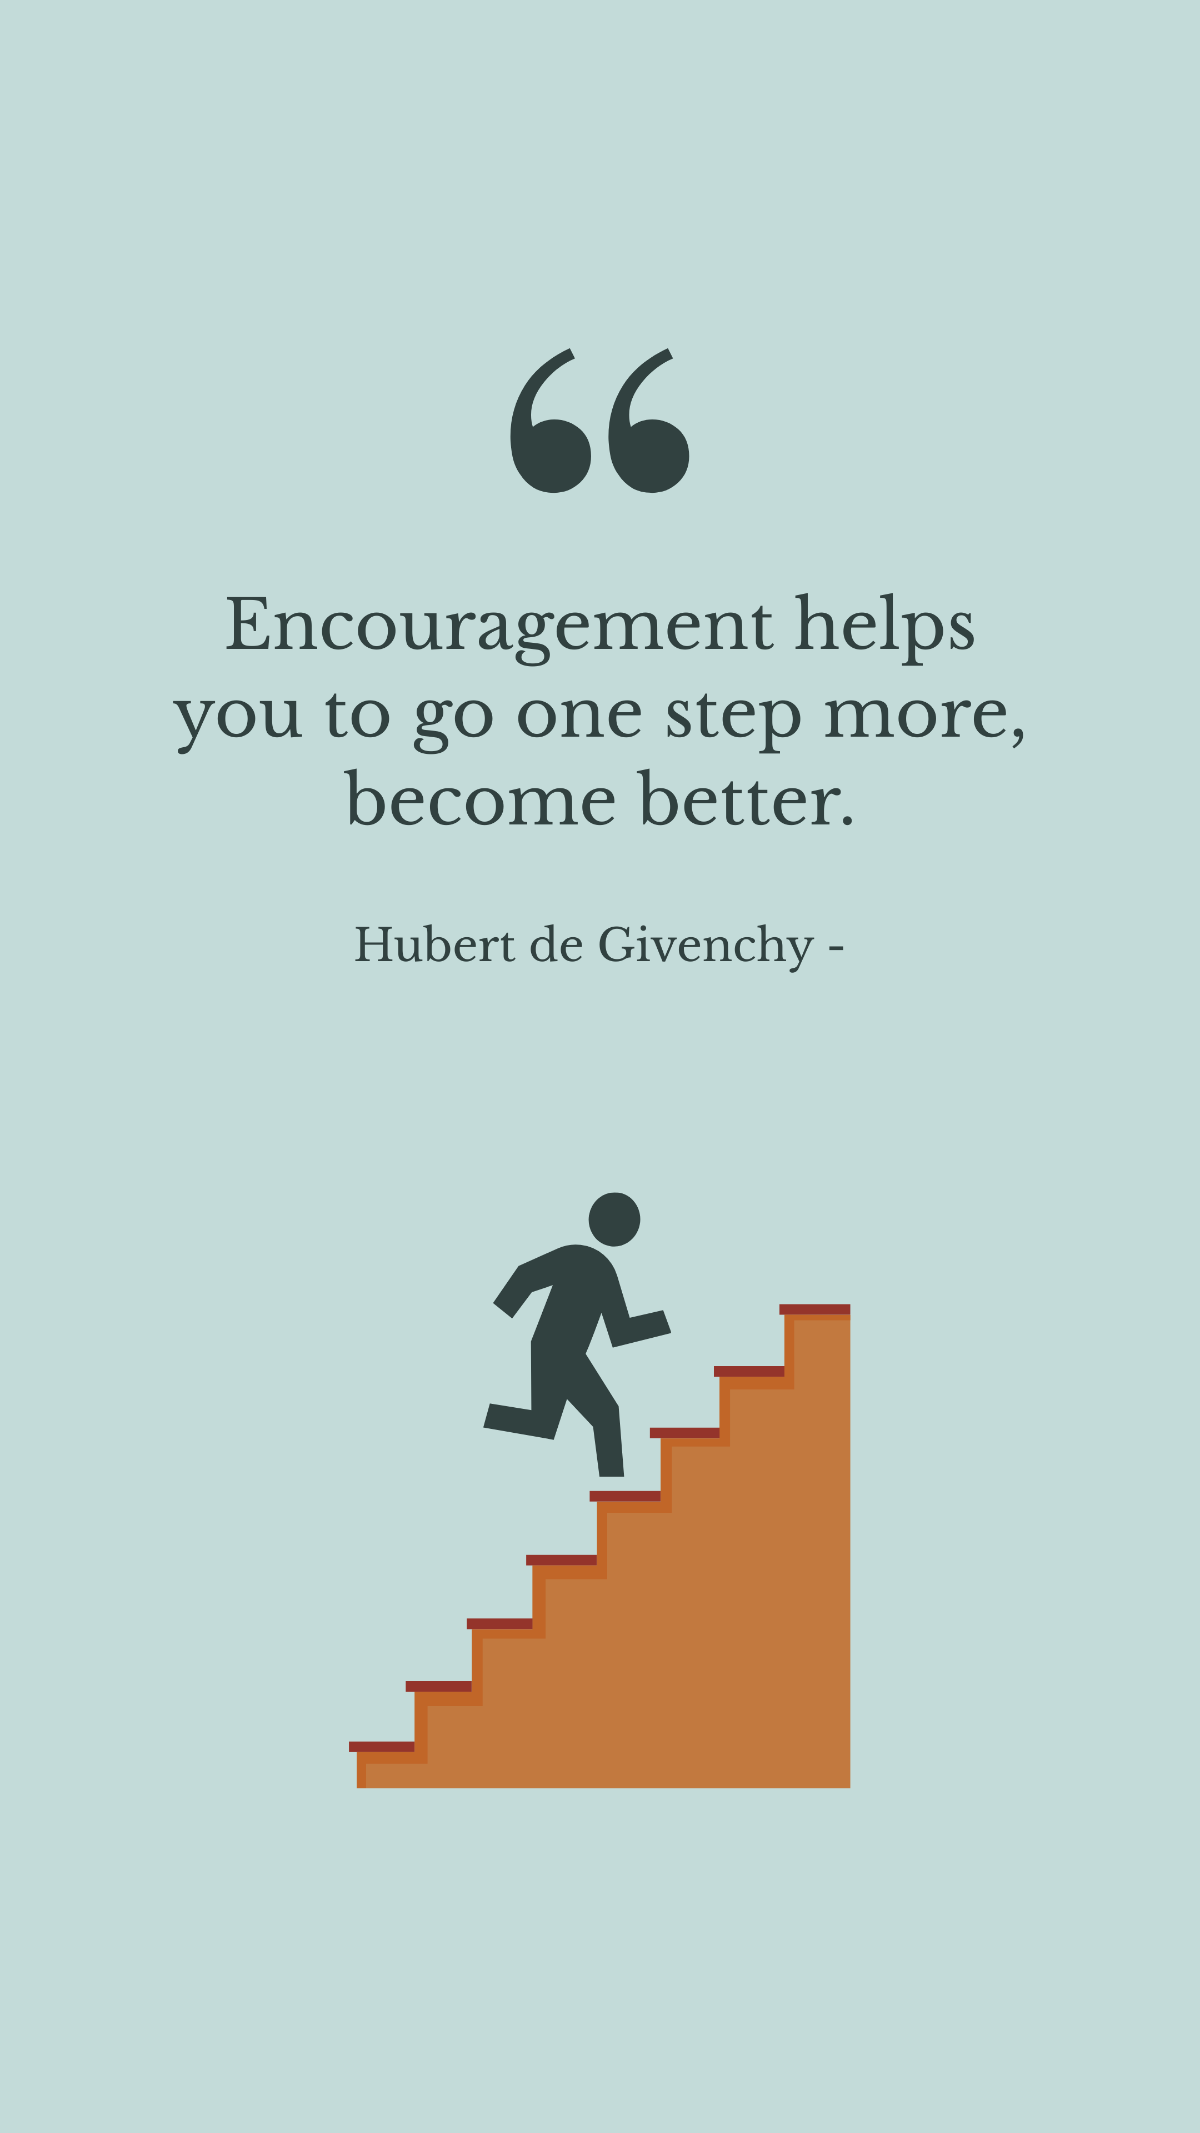 Hubert de Givenchy - Encouragement helps you to go one step more, become better. Template